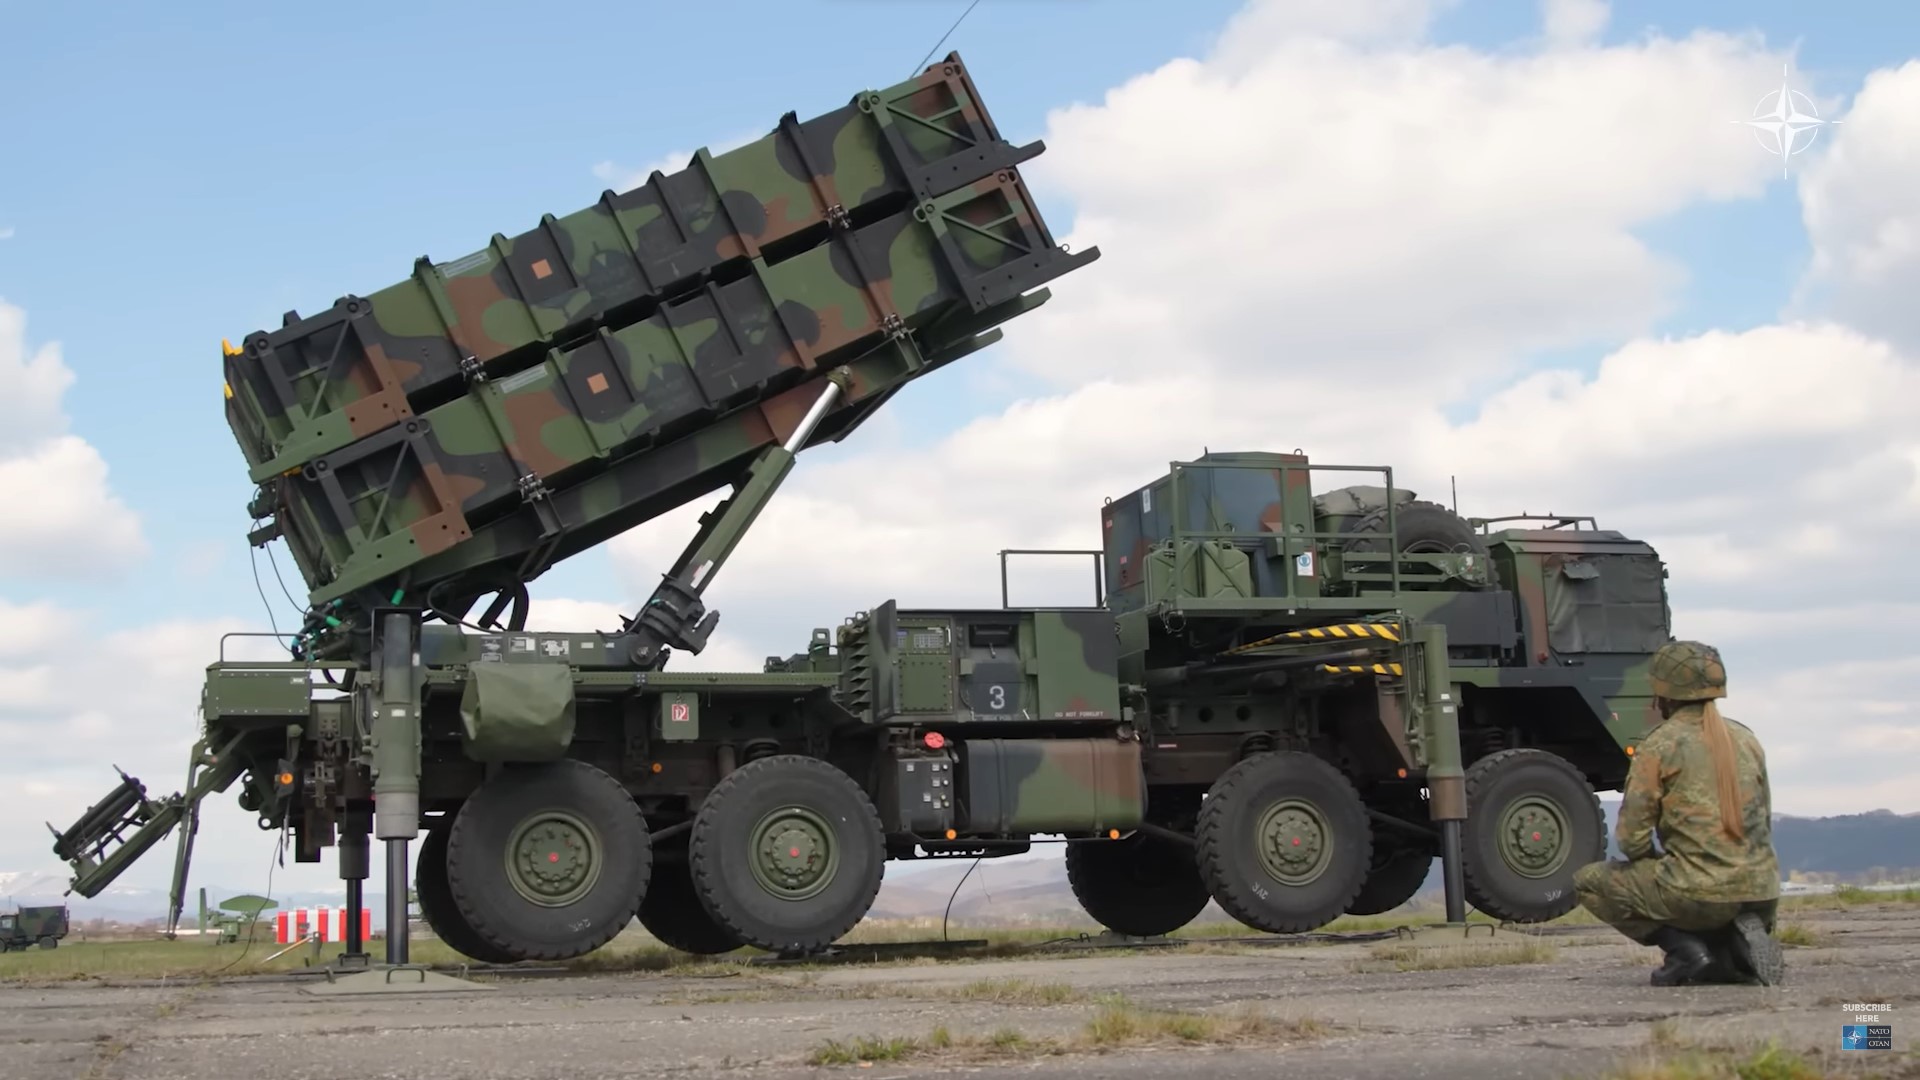 The Patriot missile defense system in action in Slovakia. Russia has opposed US decision to supply the weapon system to Ukraine.